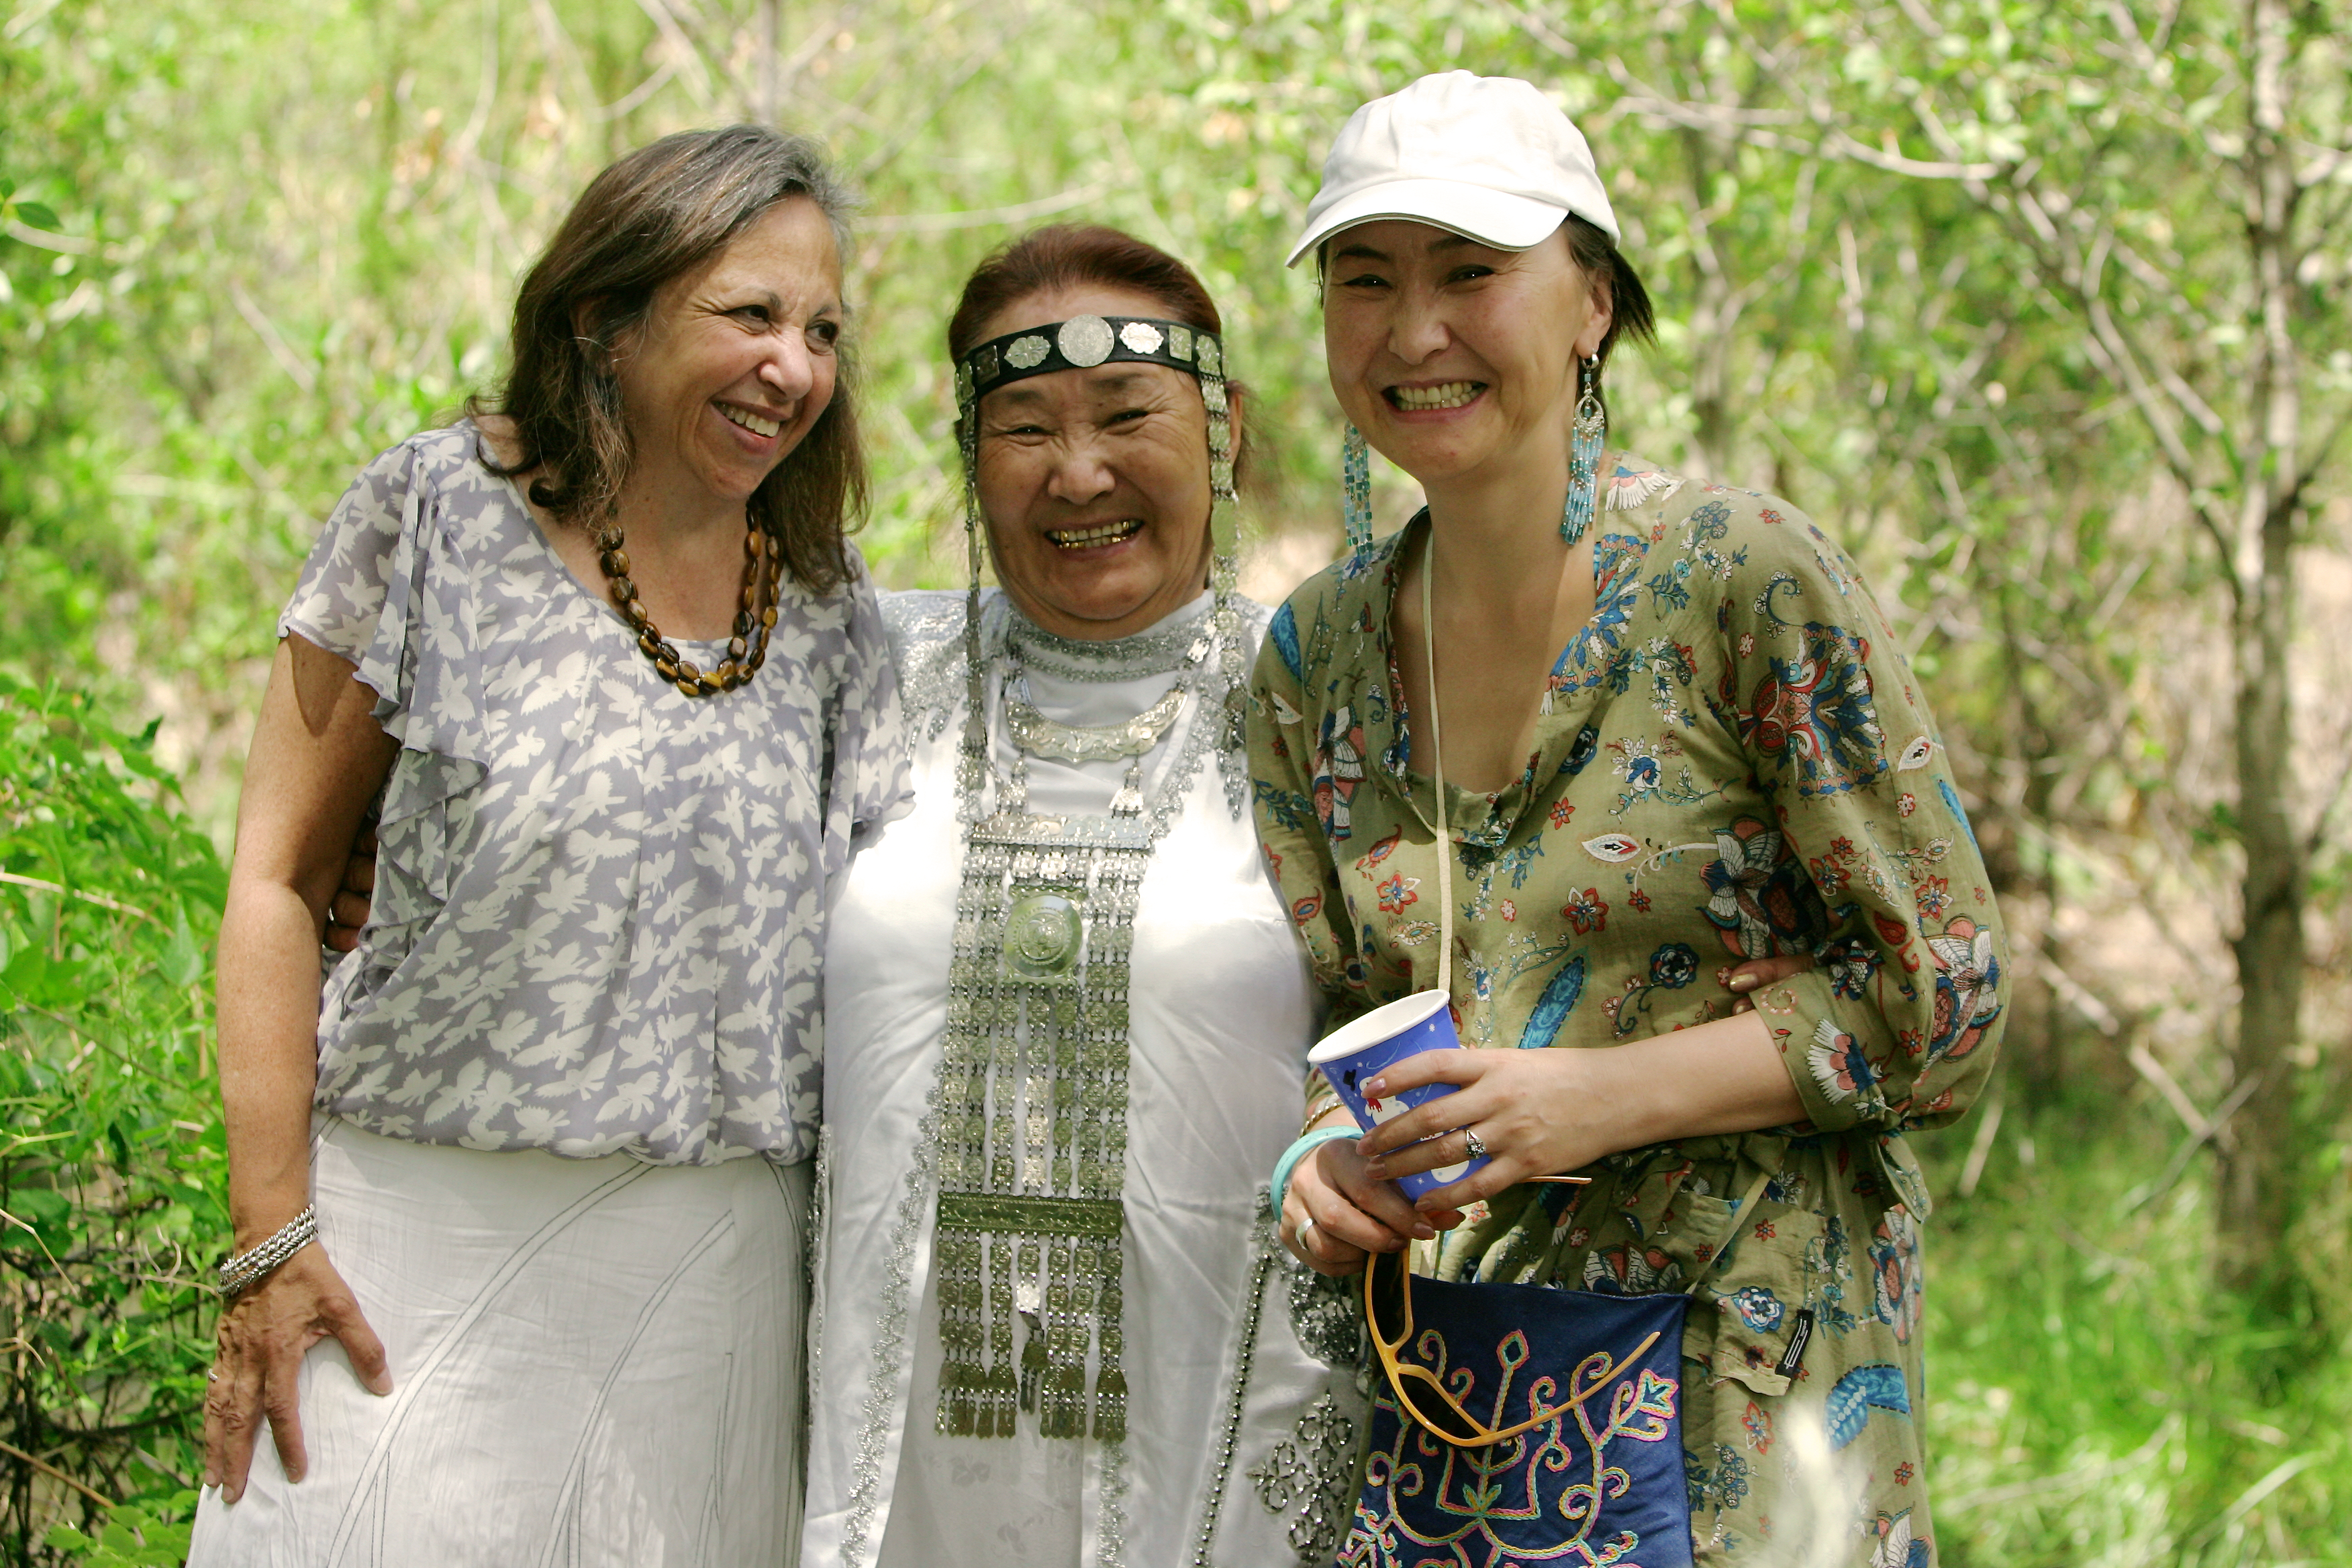 Susan Stark Christianson (left) with some of the grandmothers she interviewed from the Sakha Republic.